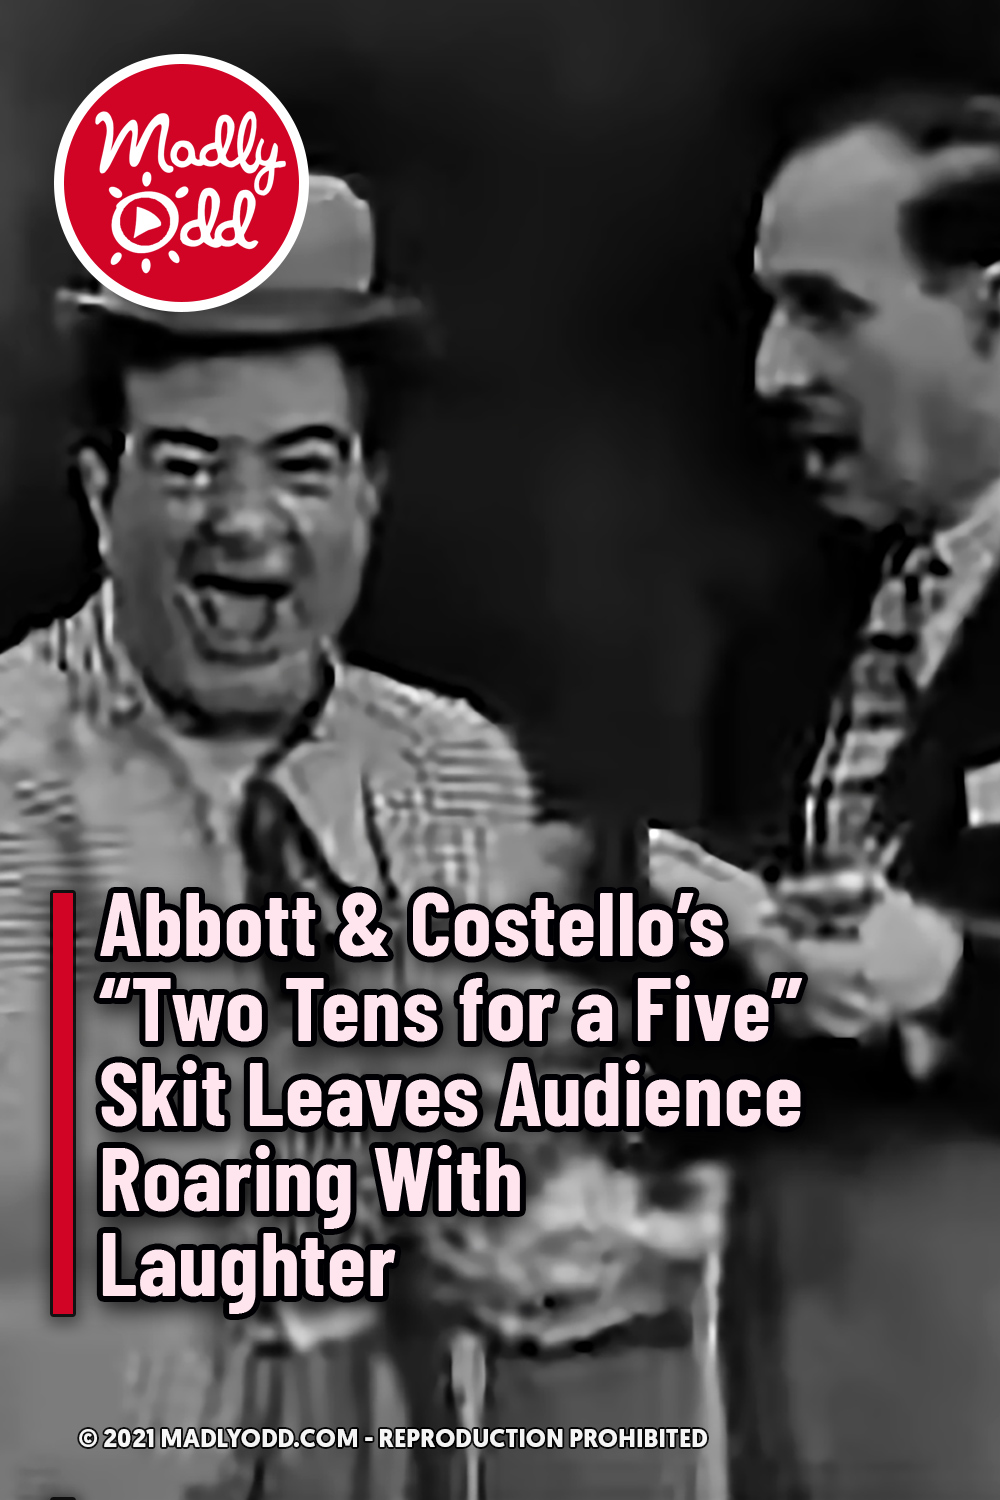 Abbott & Costello’s “Two Tens for a Five” Skit Leaves Audience Roaring With Laughter